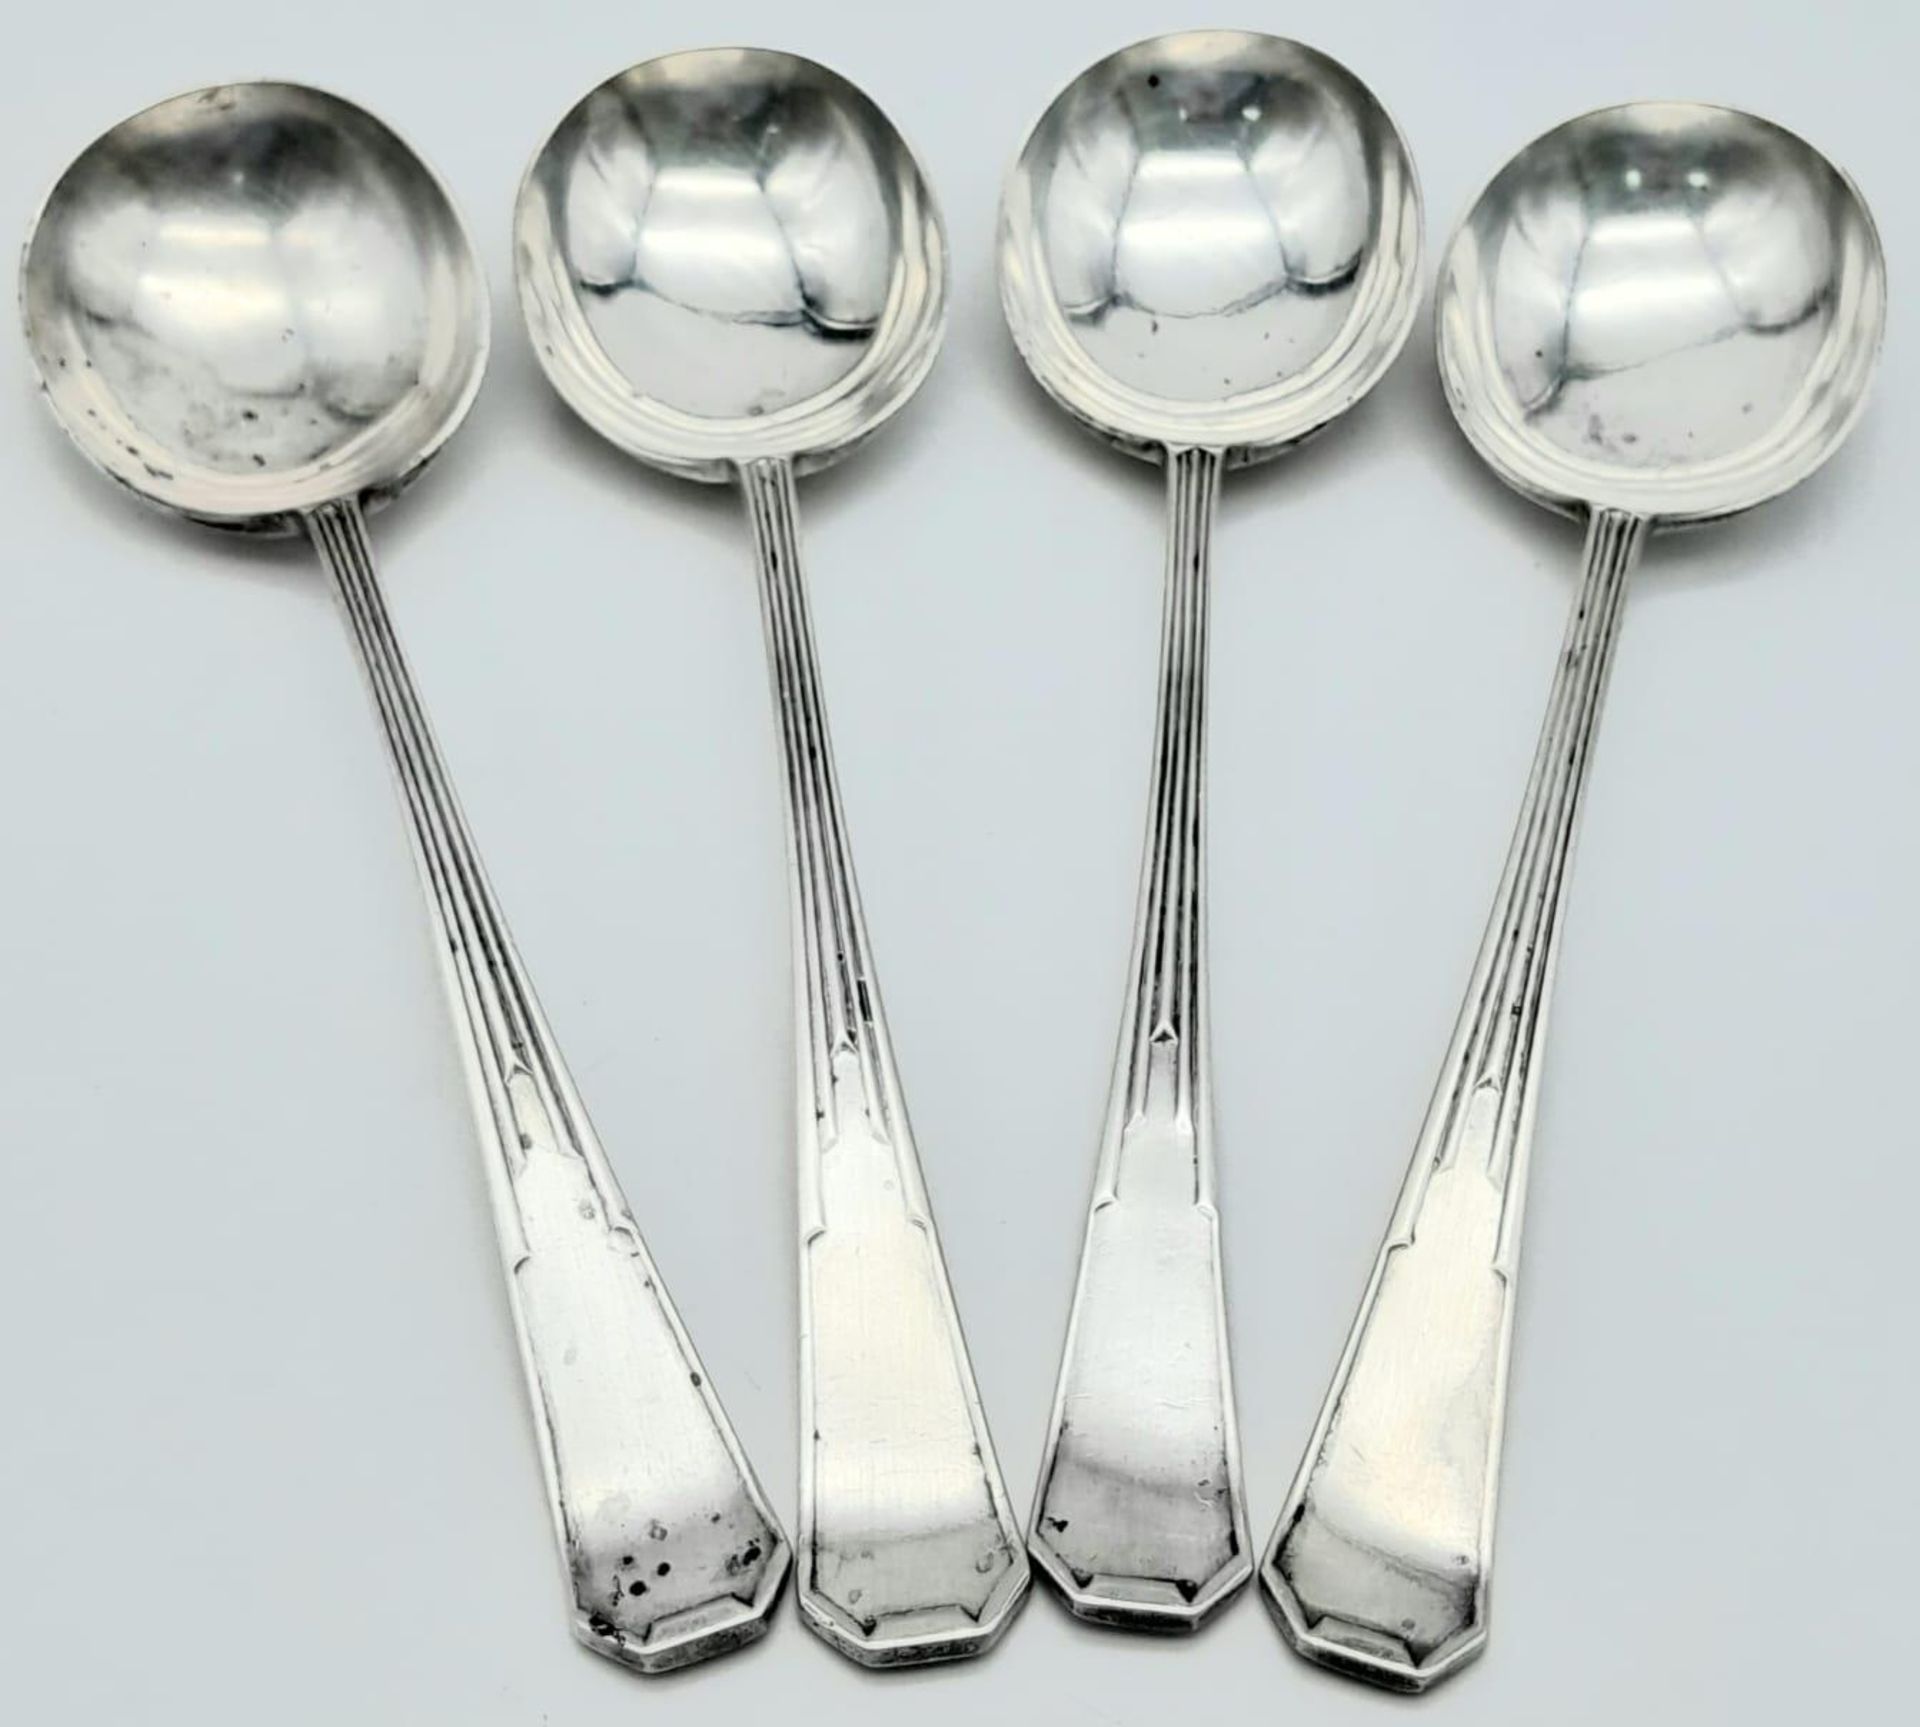 Four 1937 Sheffield Sterling Silver Serving Spoons. Full UK hallmarks. 327g total weight. 20cm